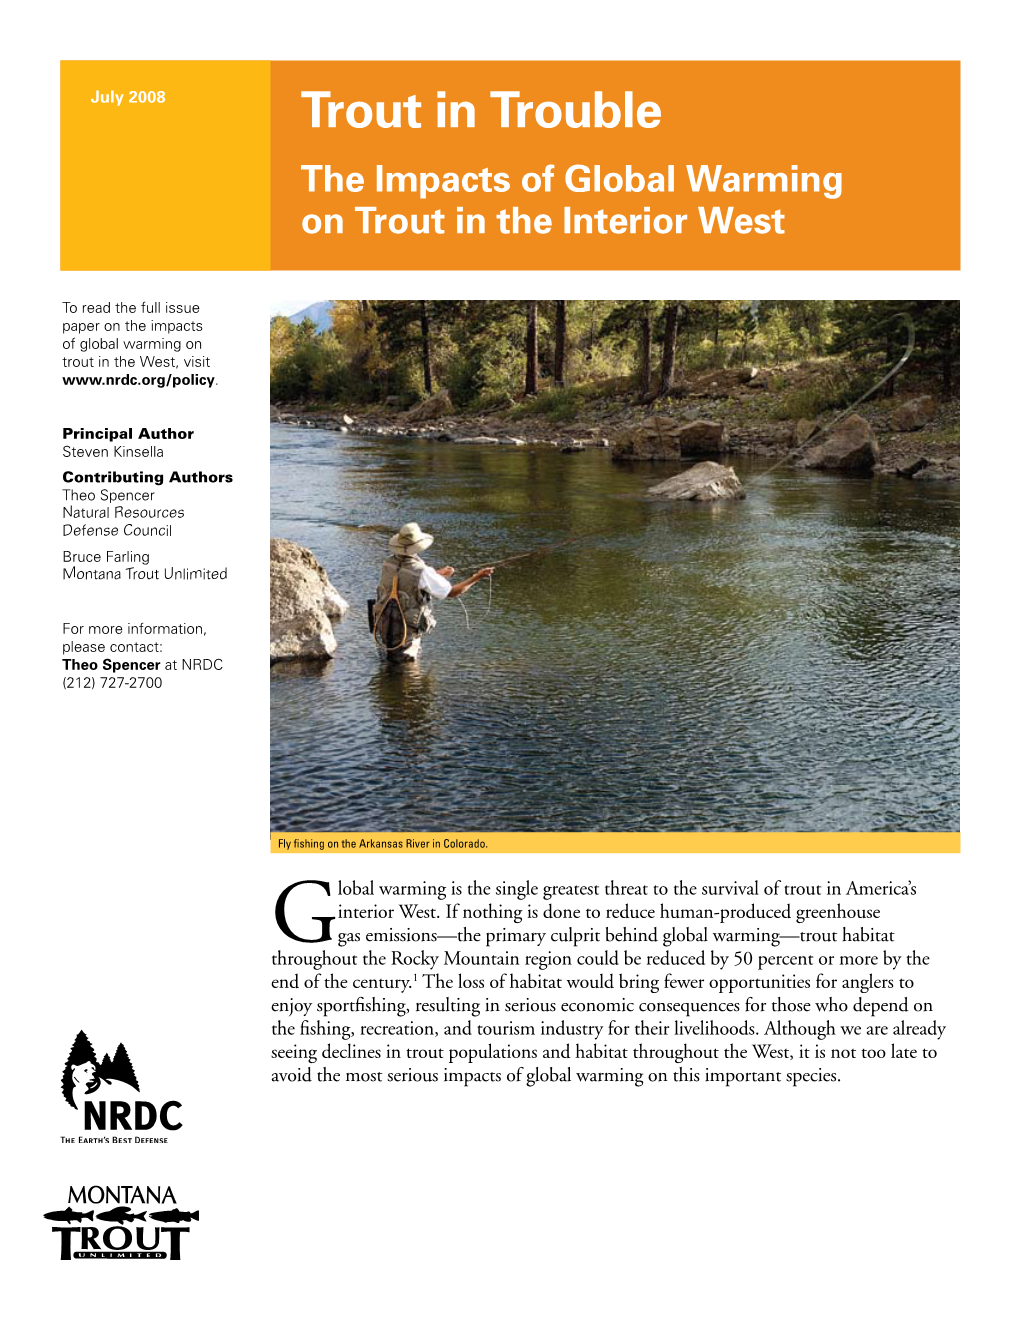 The Impacts of Global Warming on Trout in the Interior West